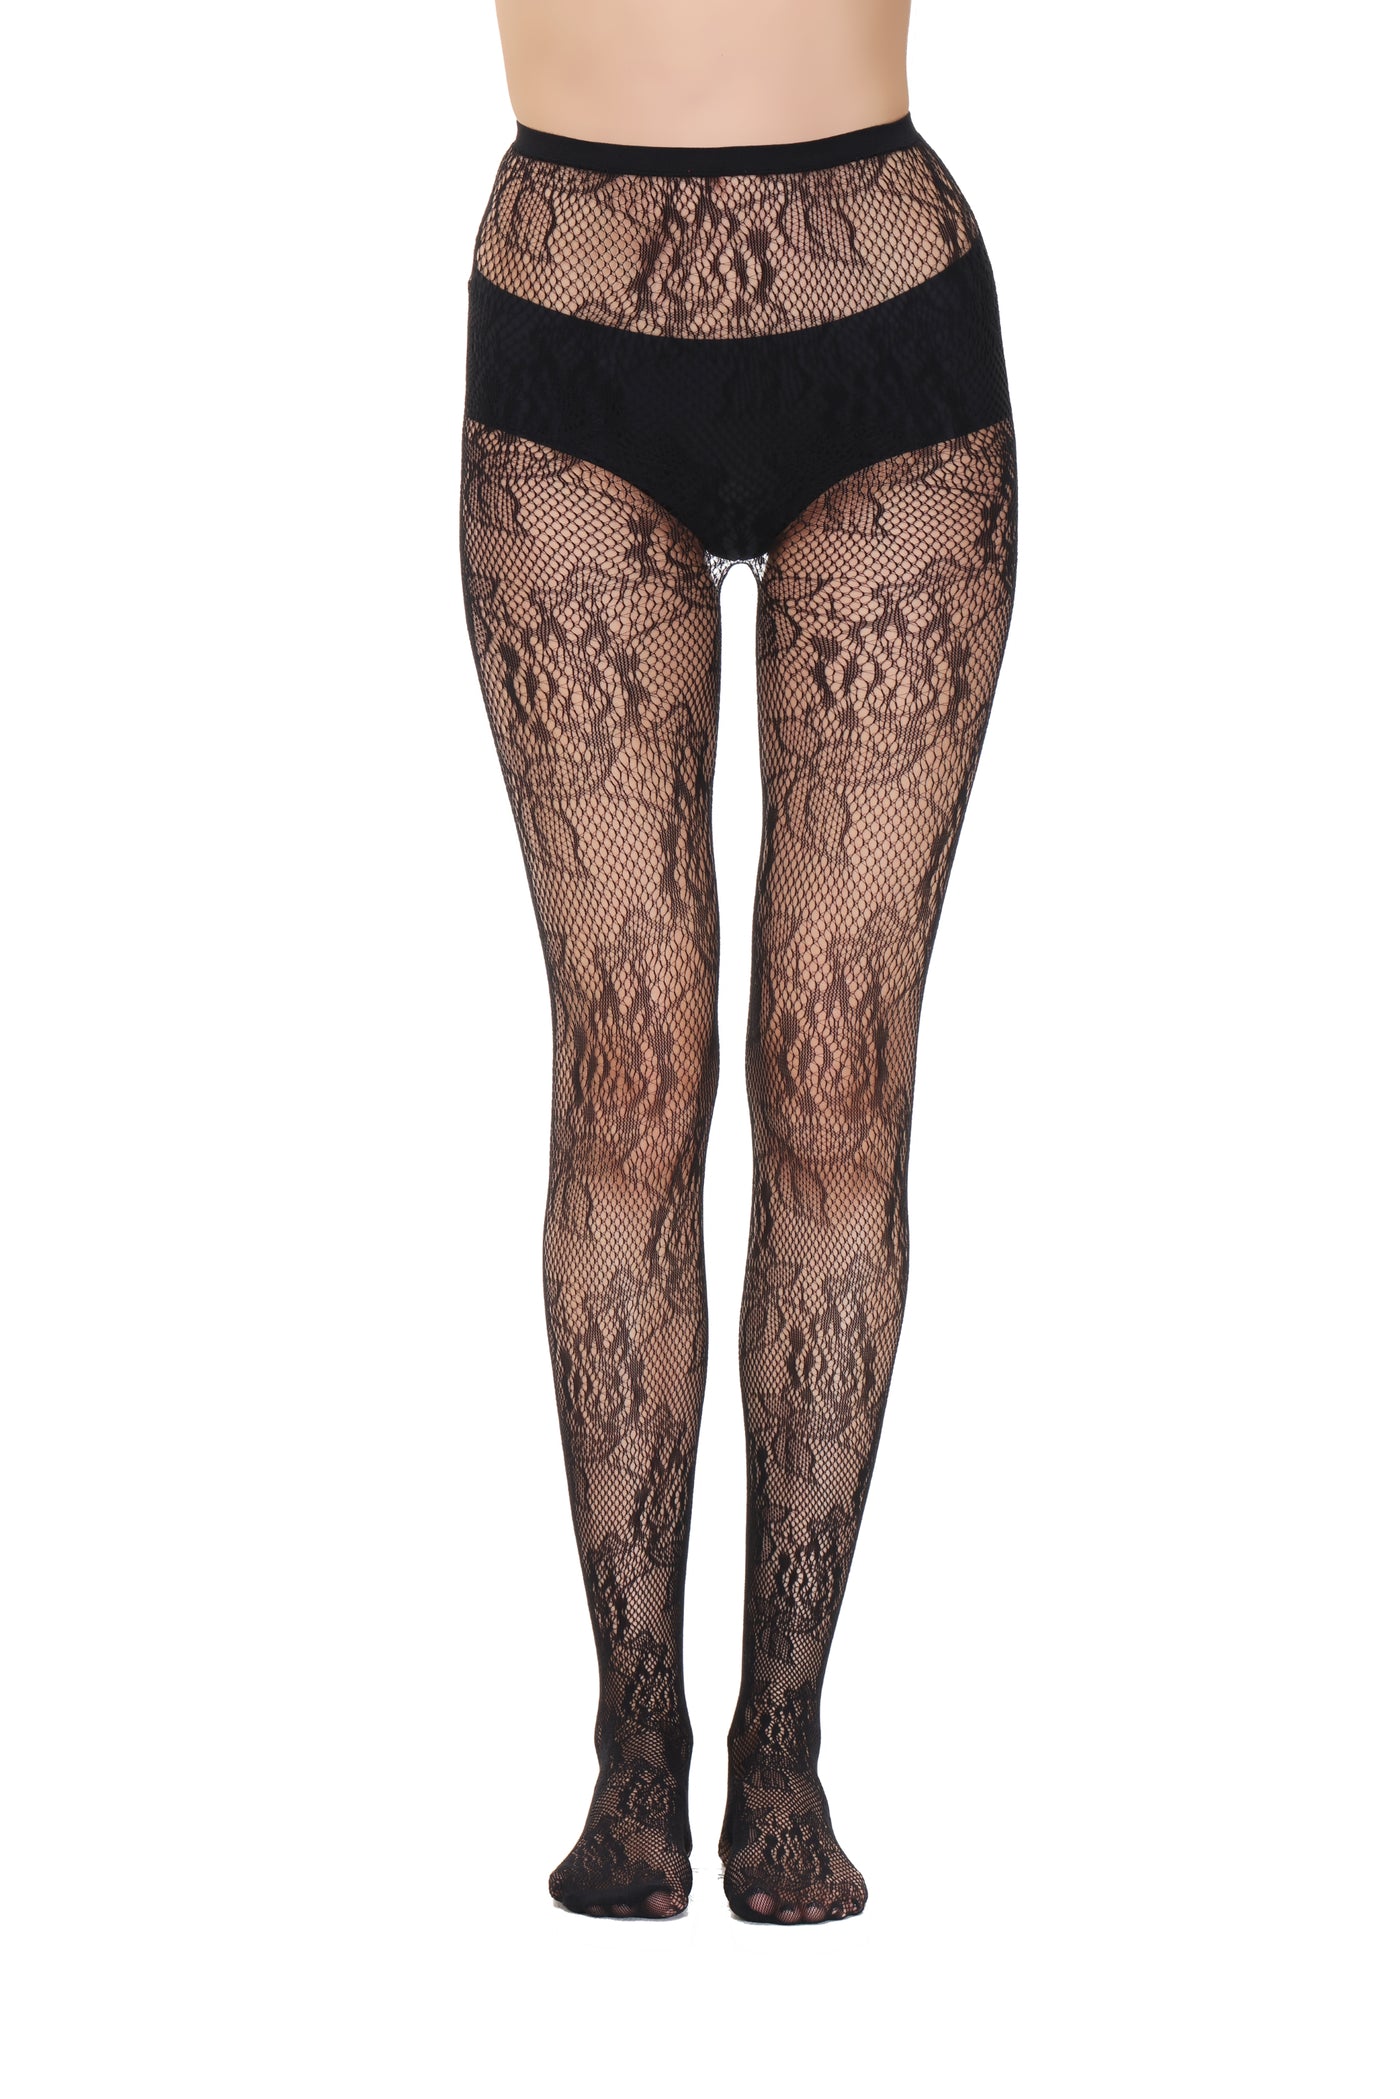 Fishnet Tights 110940 Front